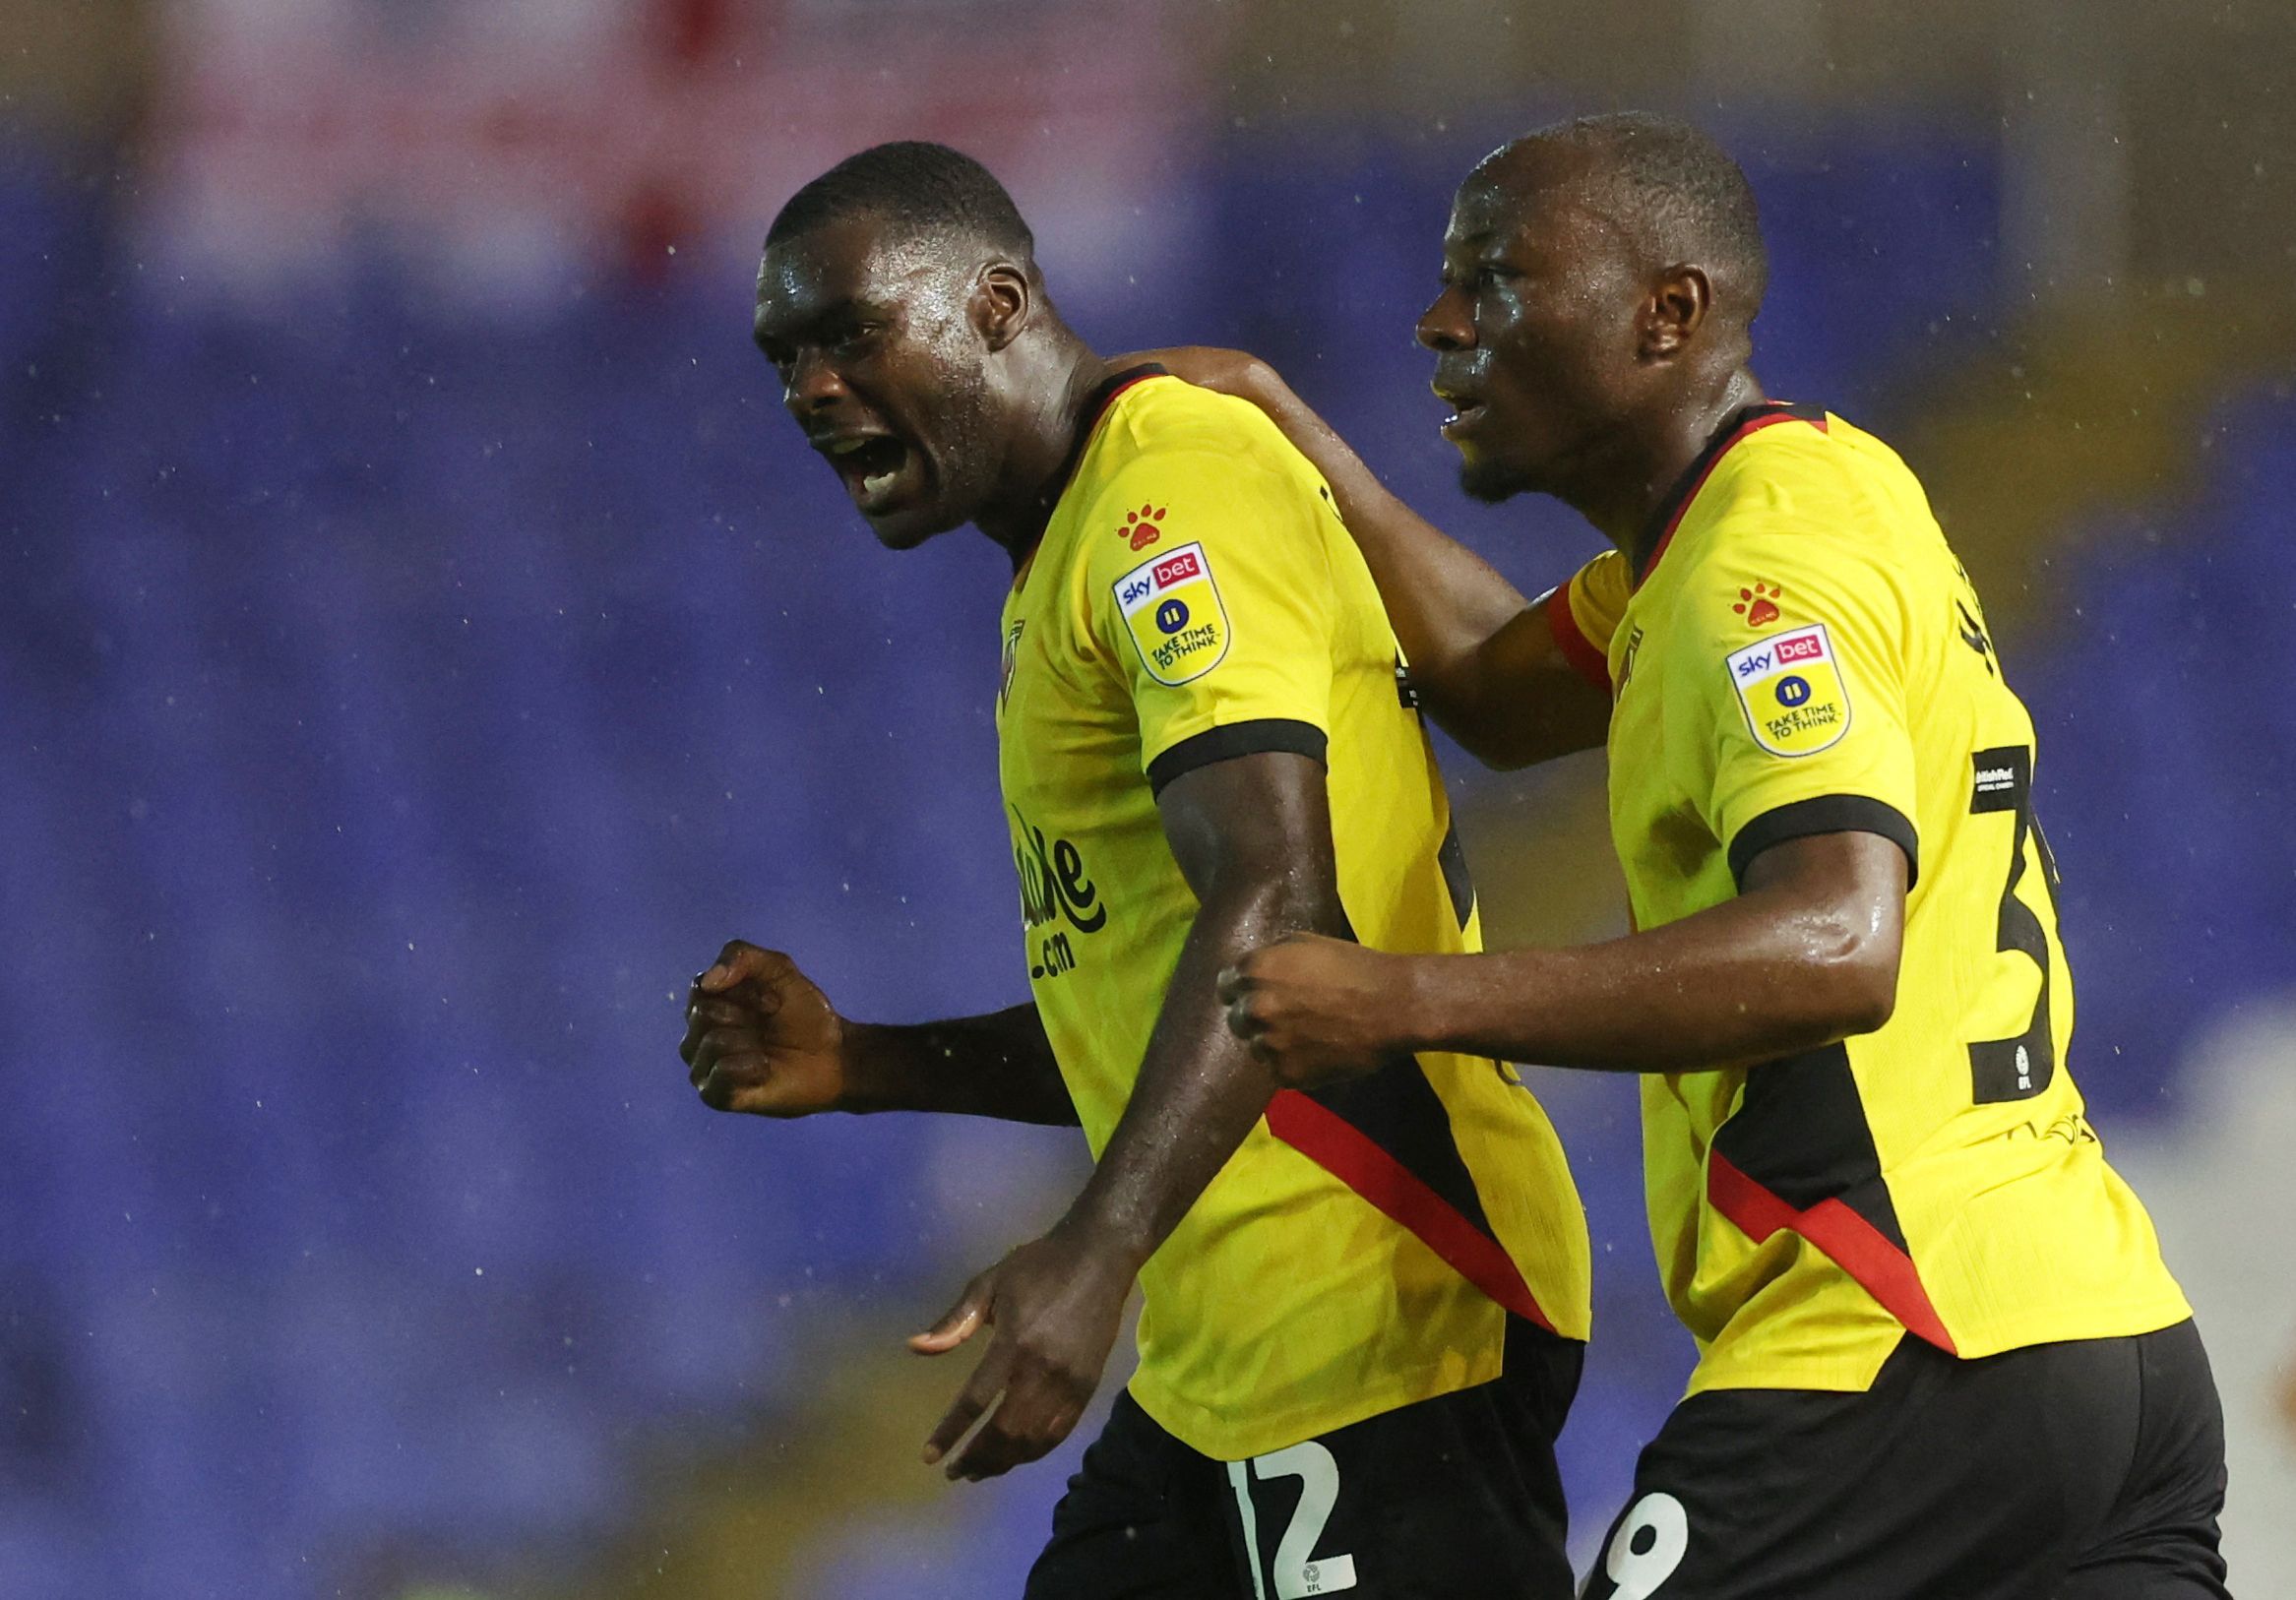 Soccer Football - Birmingham City v Watford - St Andrew's, Birmingham, Britain - August 16, 2022 Watford's Ken Sema celebrates scoring their first goal with teammate Edo Kayembe Action Images/Carl Recine EDITORIAL USE ONLY. No use with unauthorized audio, video, data, fixture lists, club/league logos or 'live' services. Online in-match use limited to 75 images, no video emulation. No use in betting, games or single club /league/player publications.  Please contact your account representative for